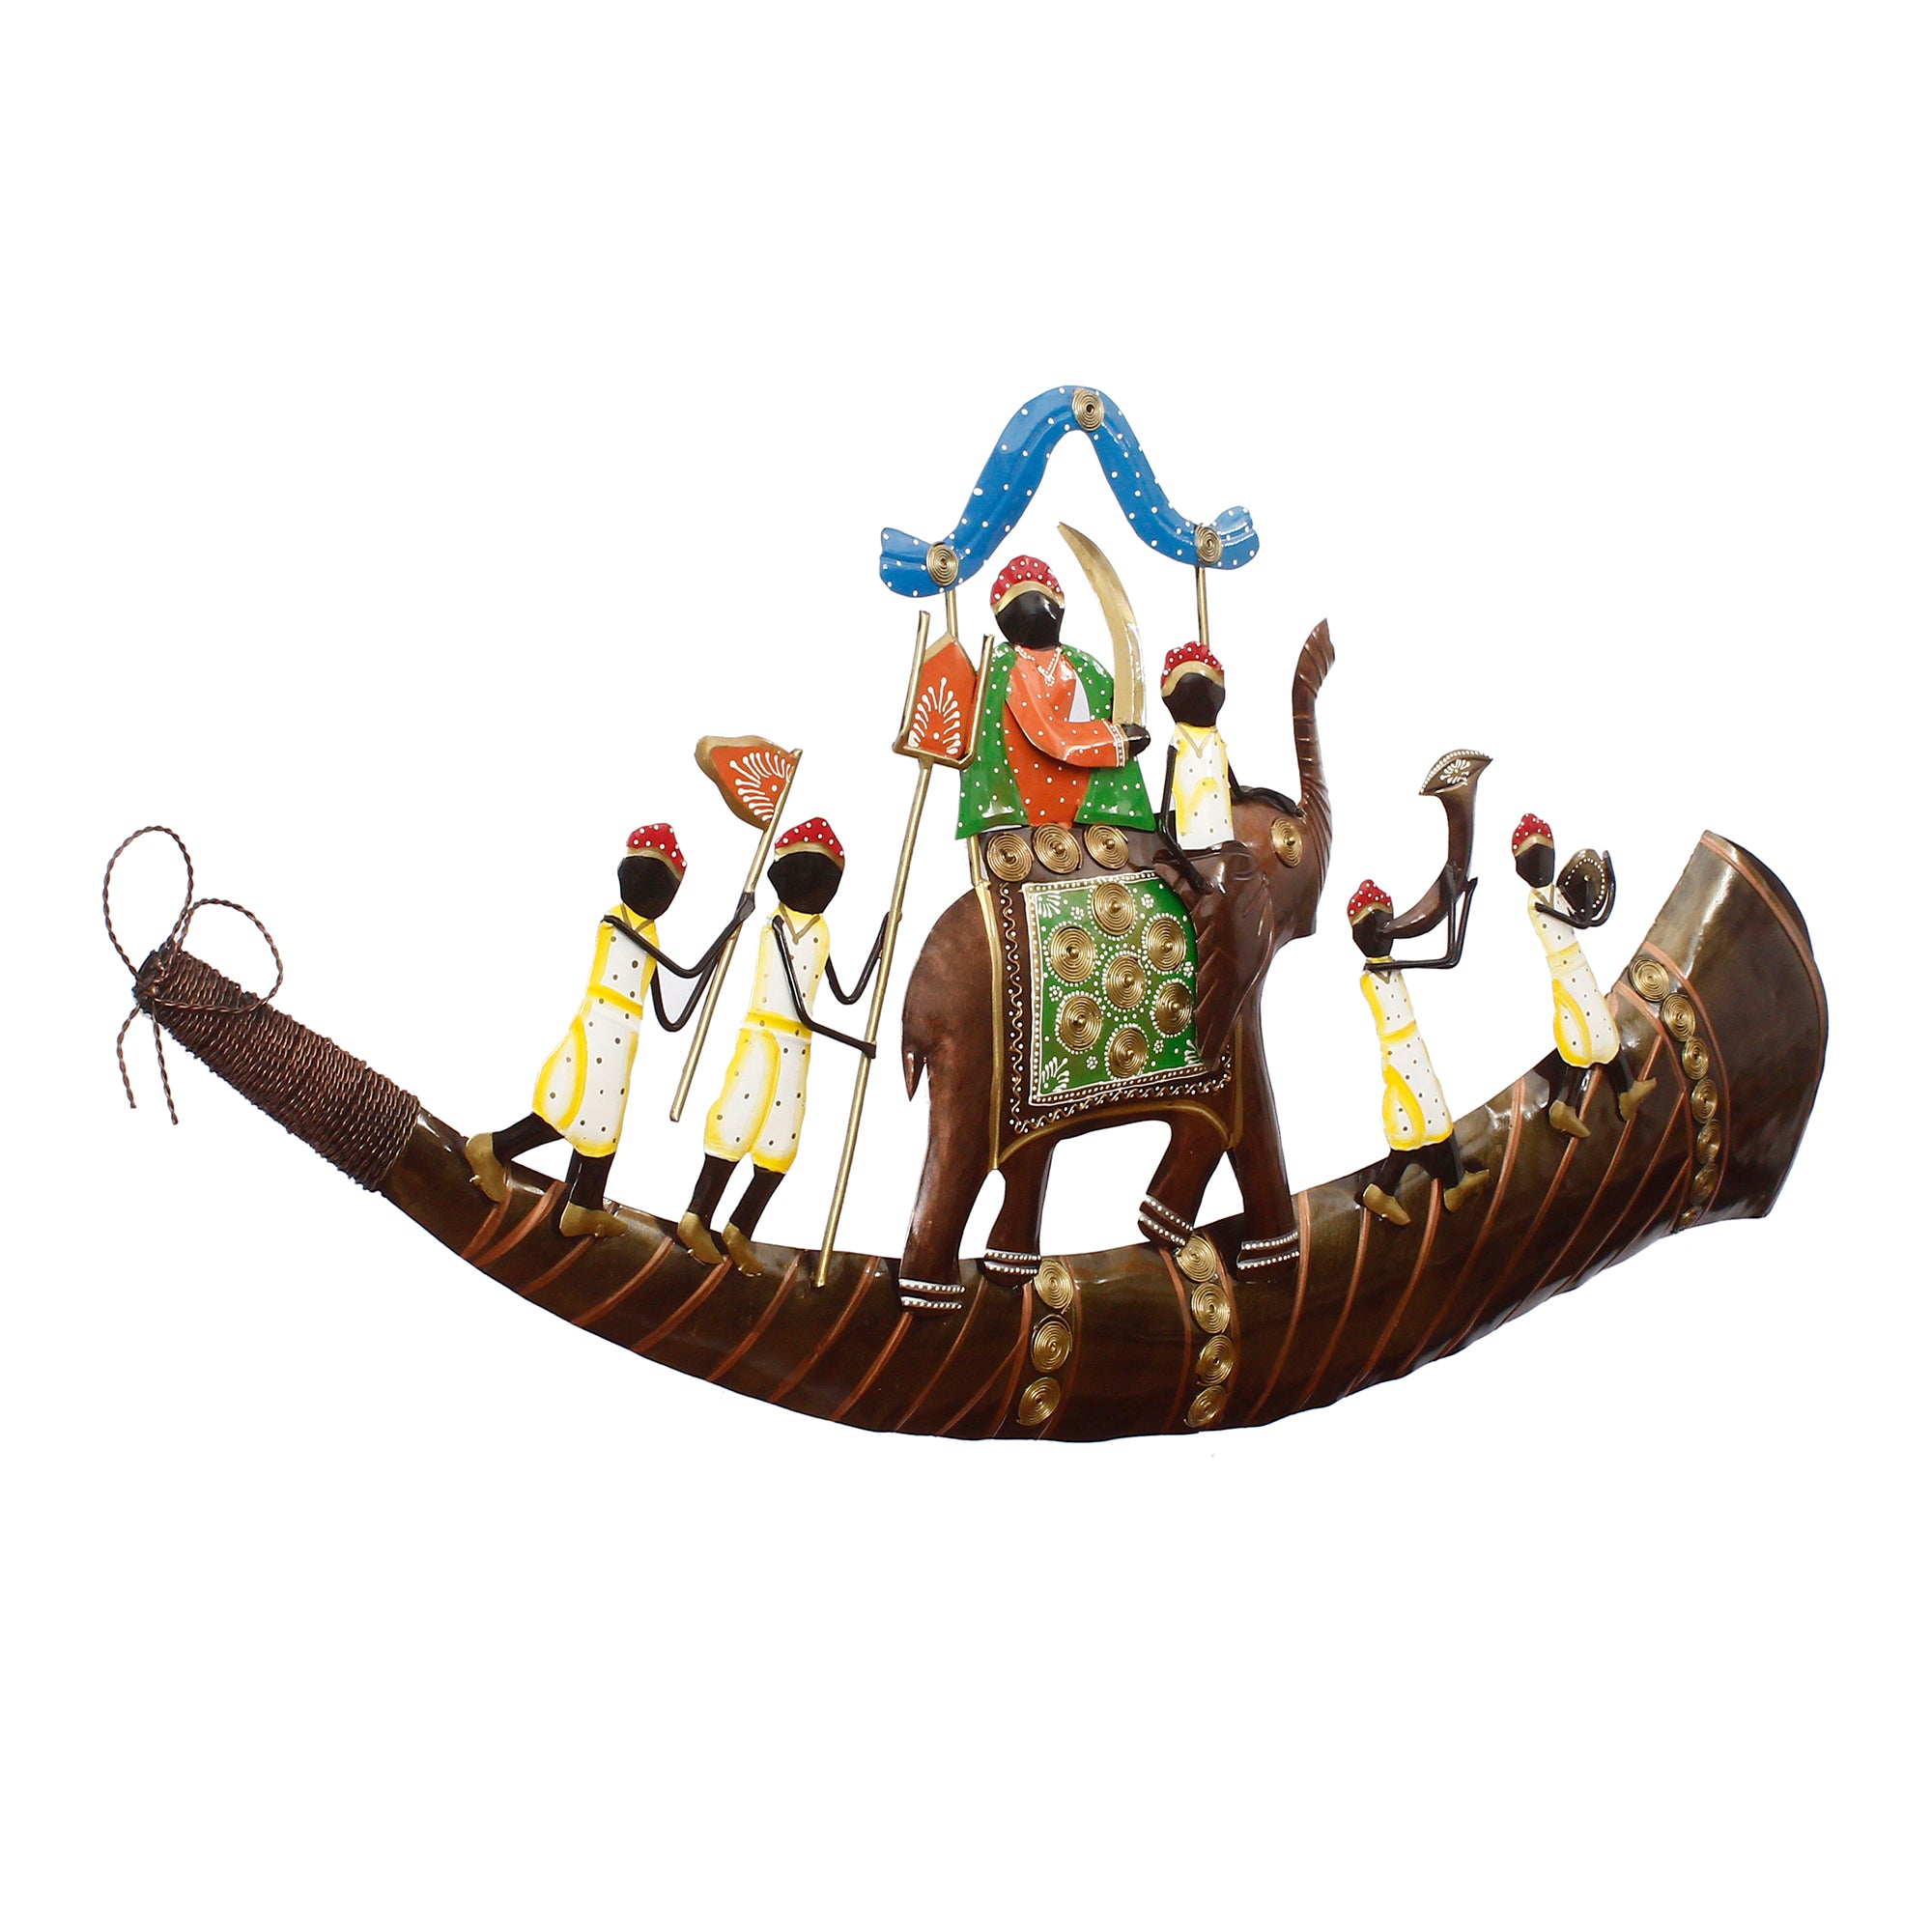 Royal Procession of King on Shehnai Decorative Iron Wall Hanging/Art (Brown, Blue and Green) 4